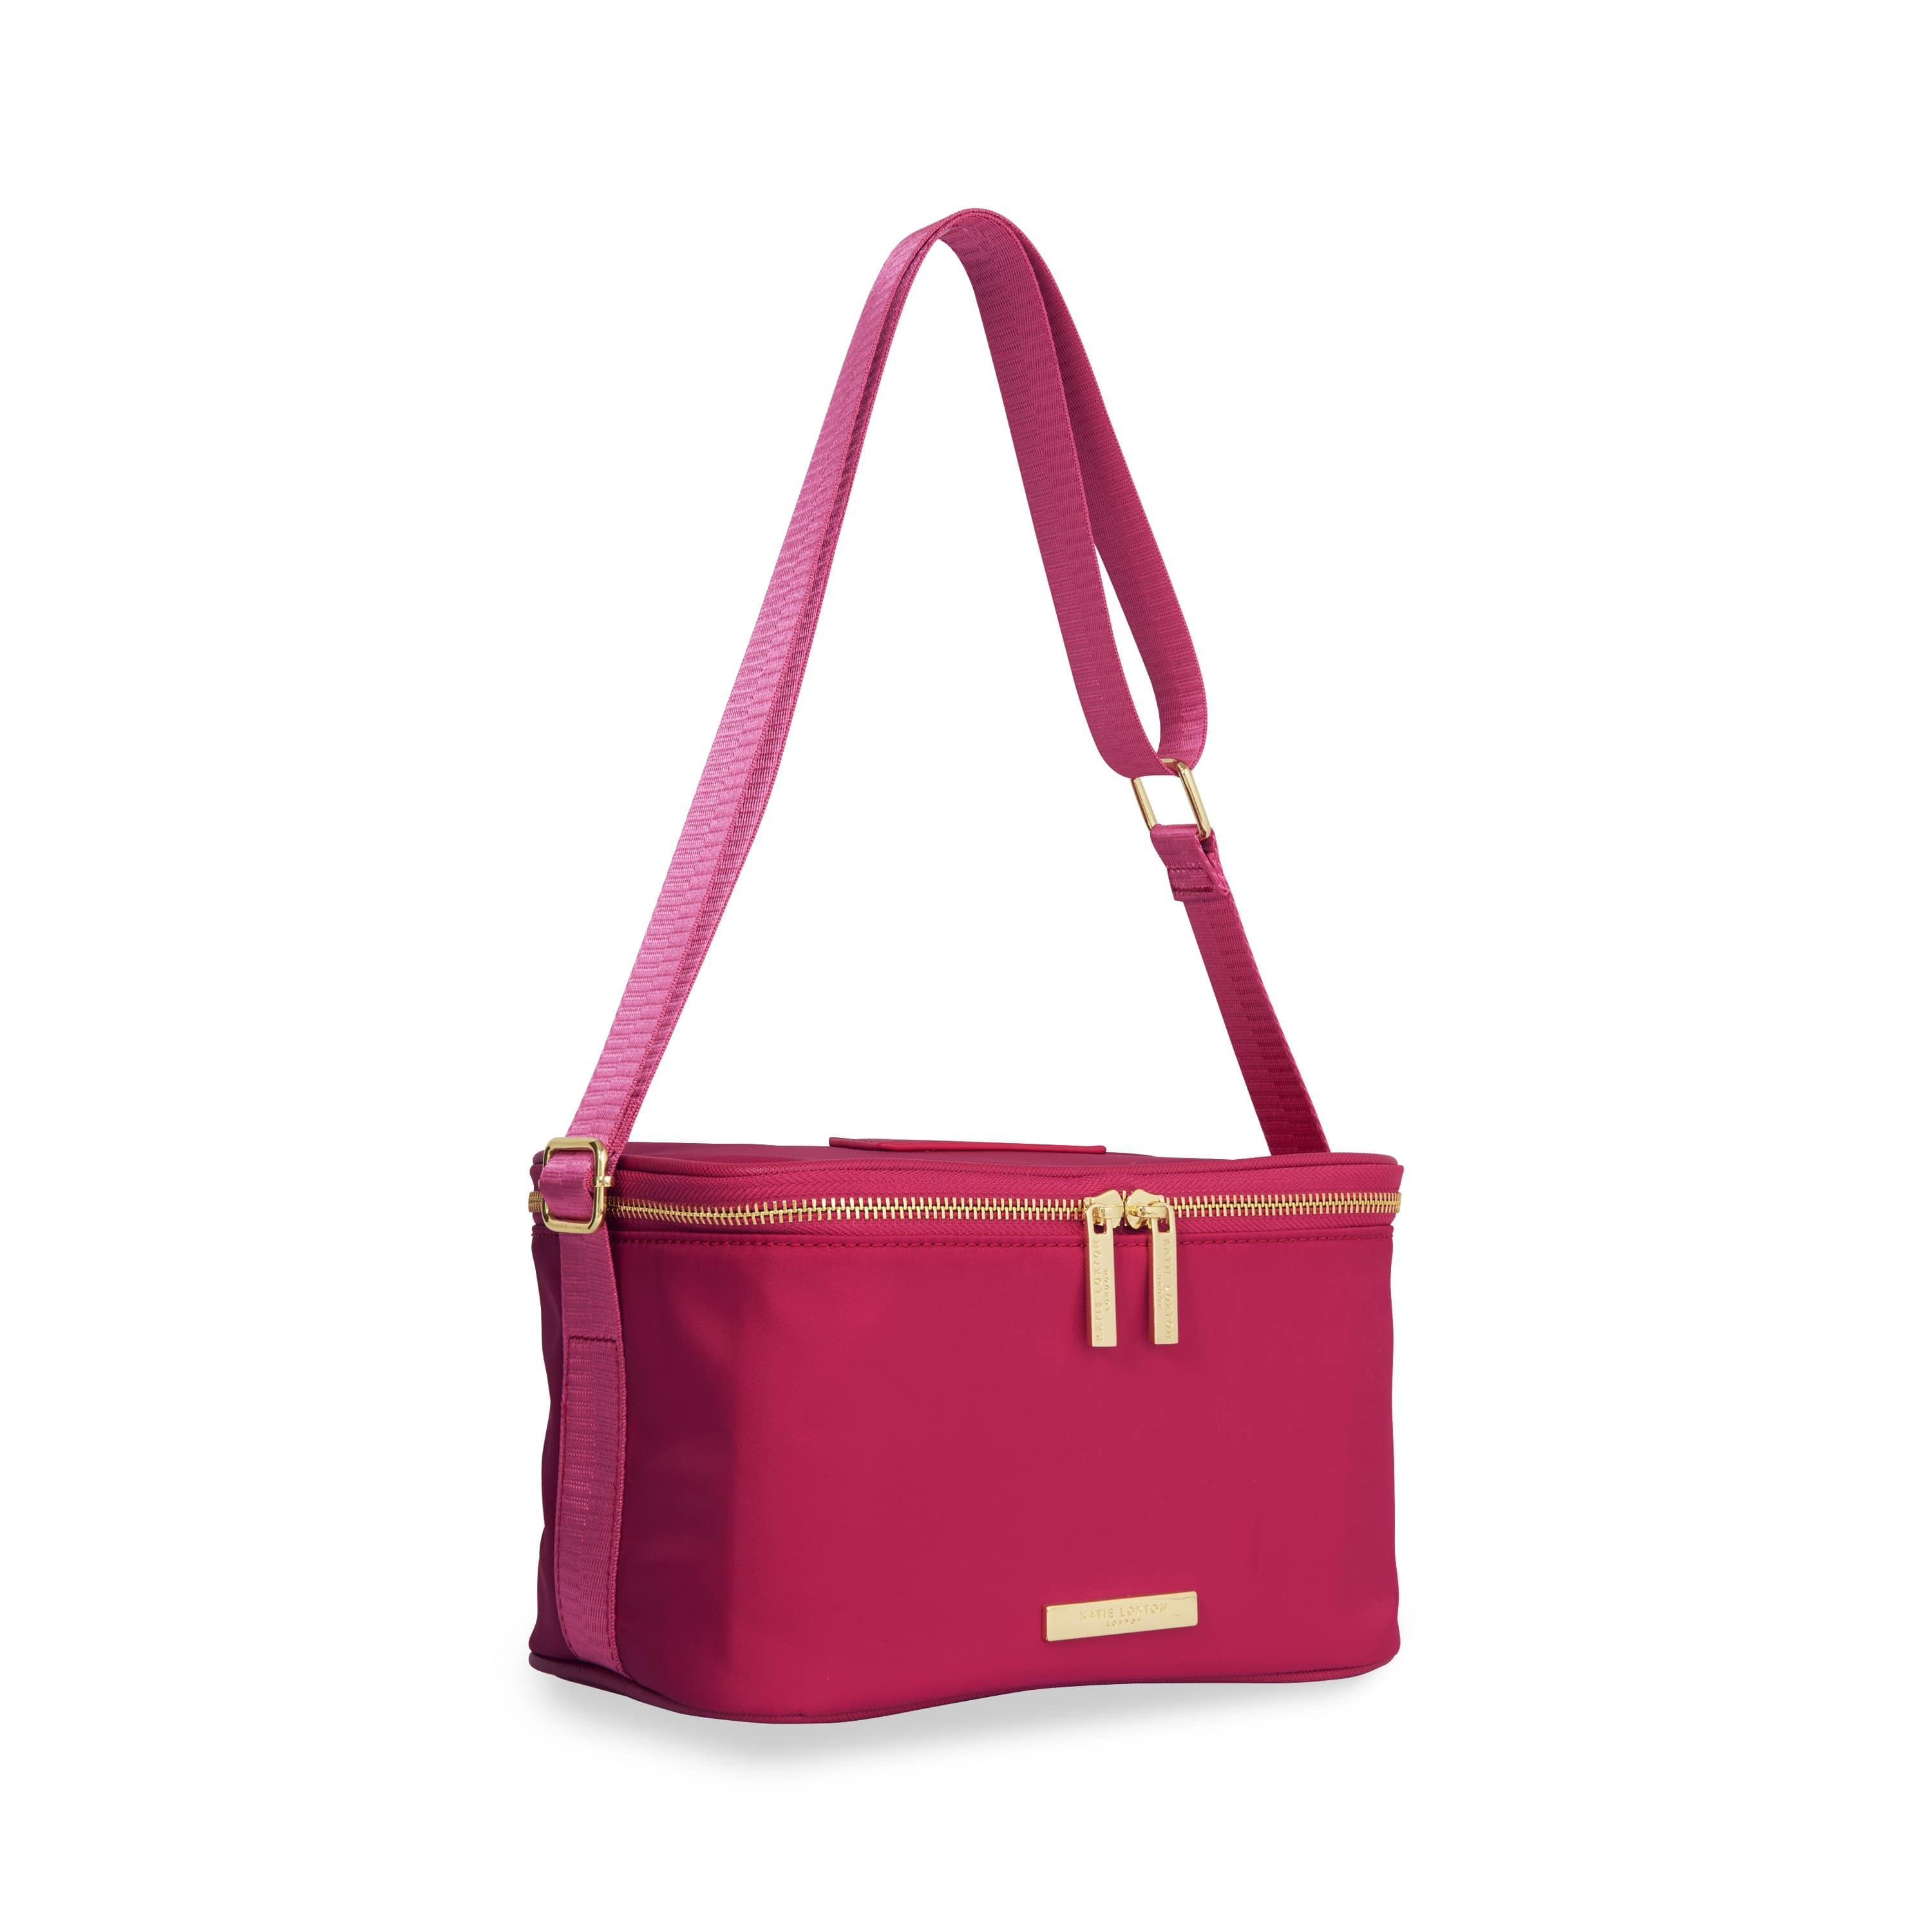 KTLX LUNCH BAG LIVE LAUGH LUNCH FUCHSIA PINK - Jashanmal Home